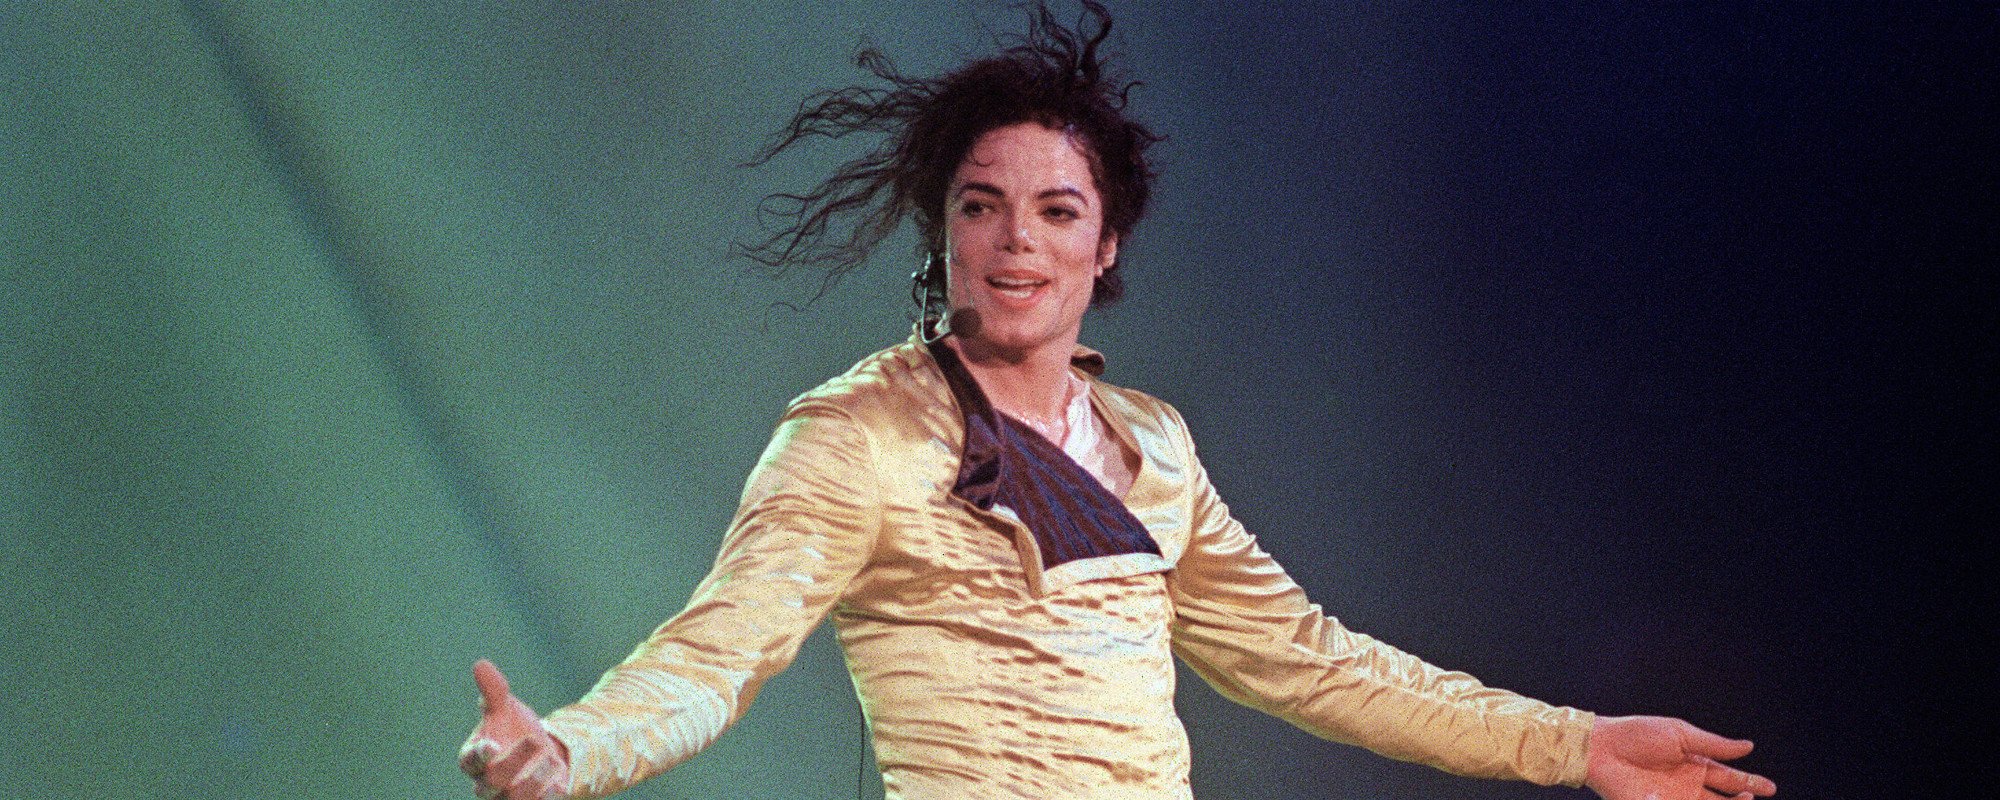 7 Songs You Didn't Know Michael Jackson Wrote for Other Artists